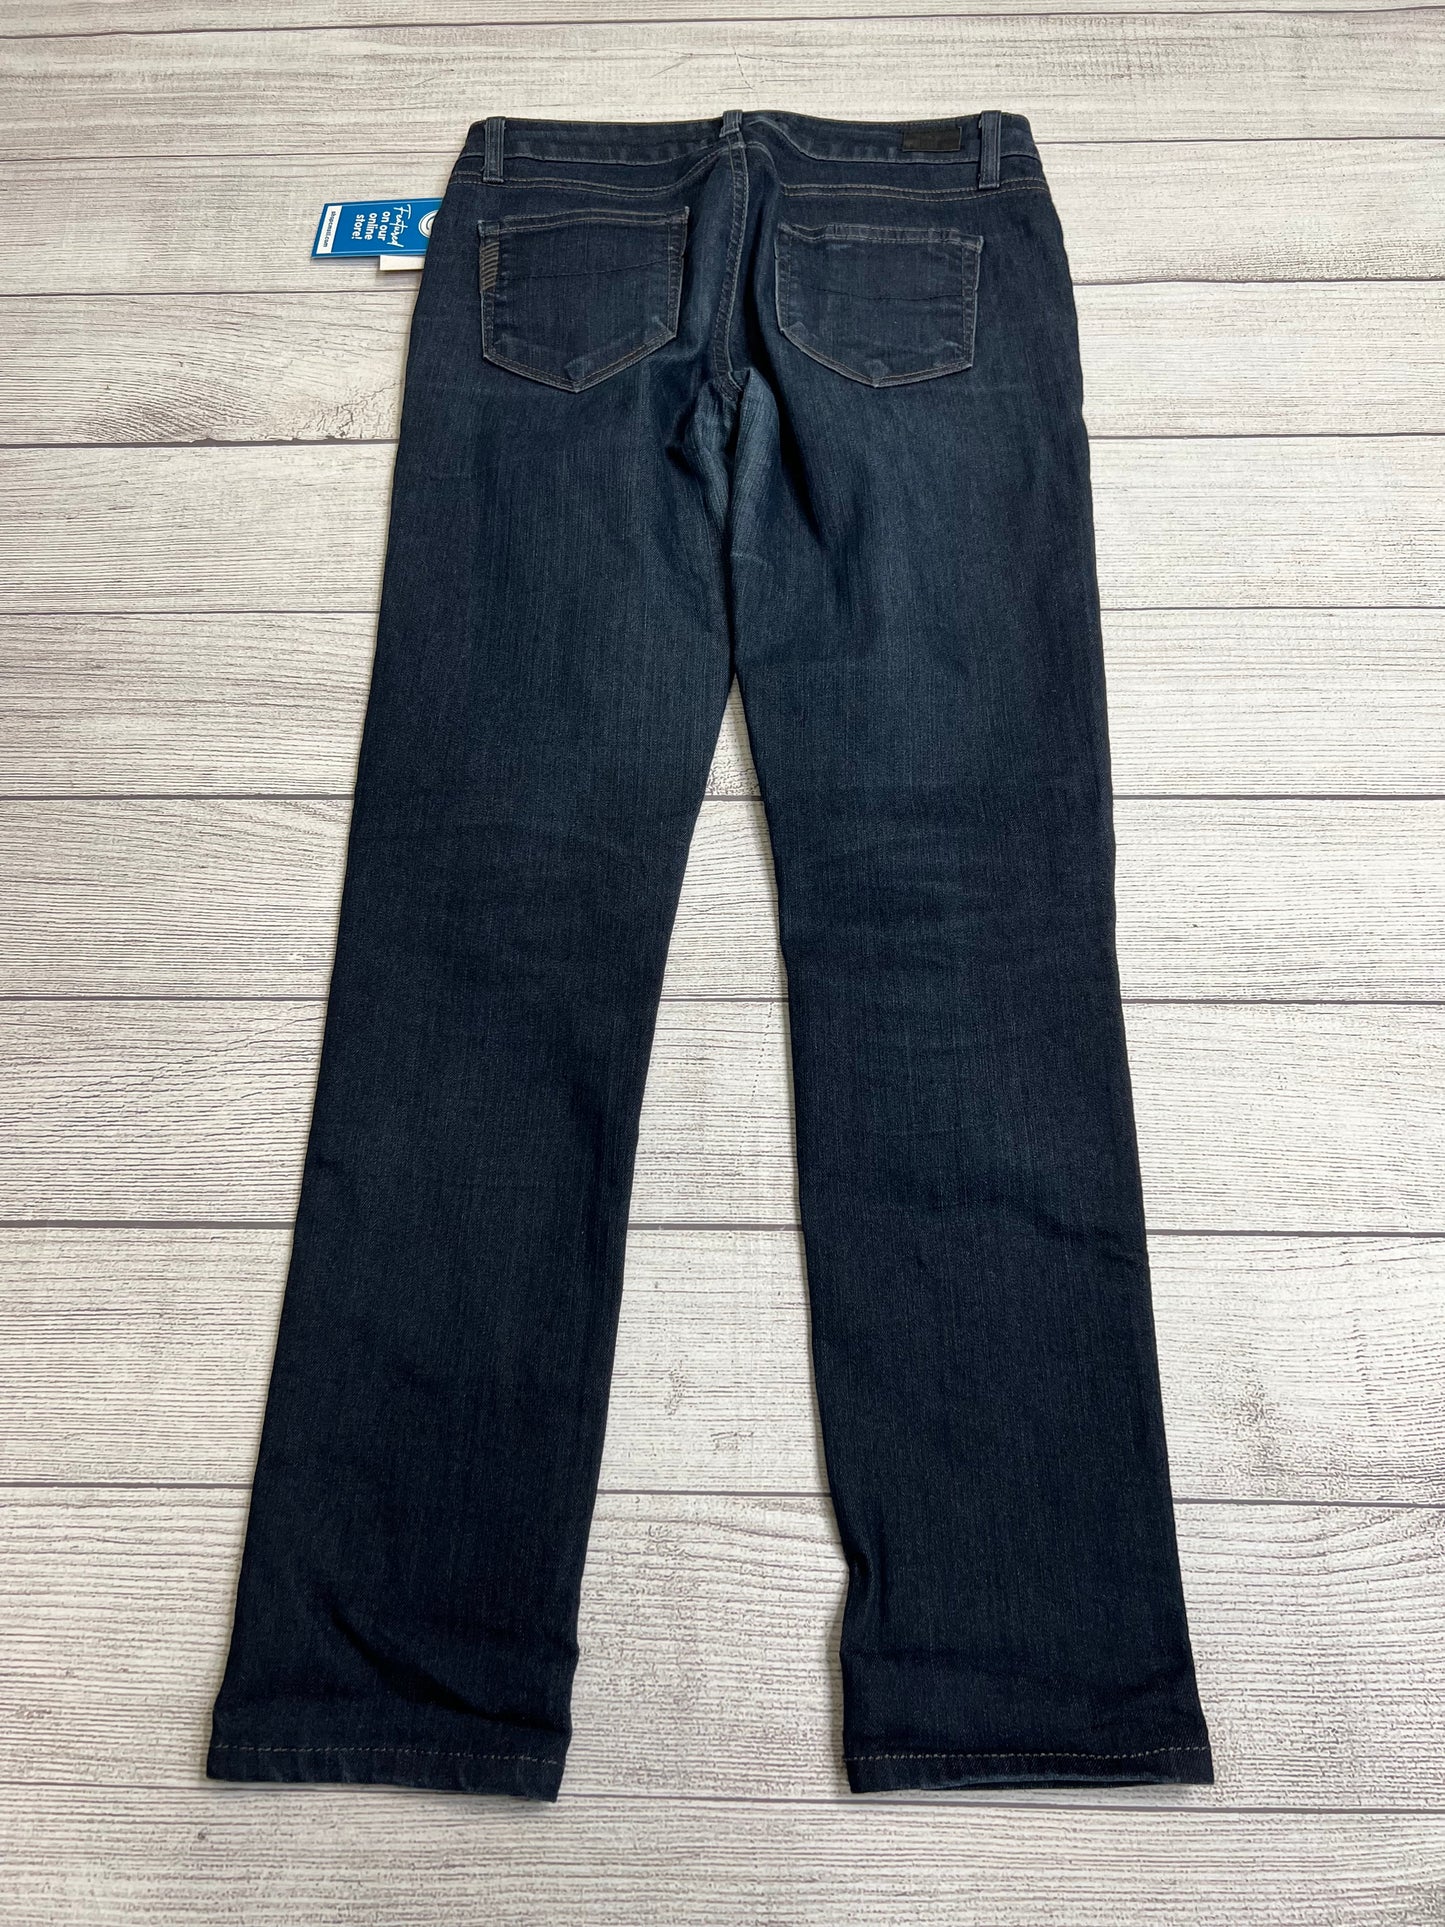 Jeans Skinny By Paige  Size: 4/26